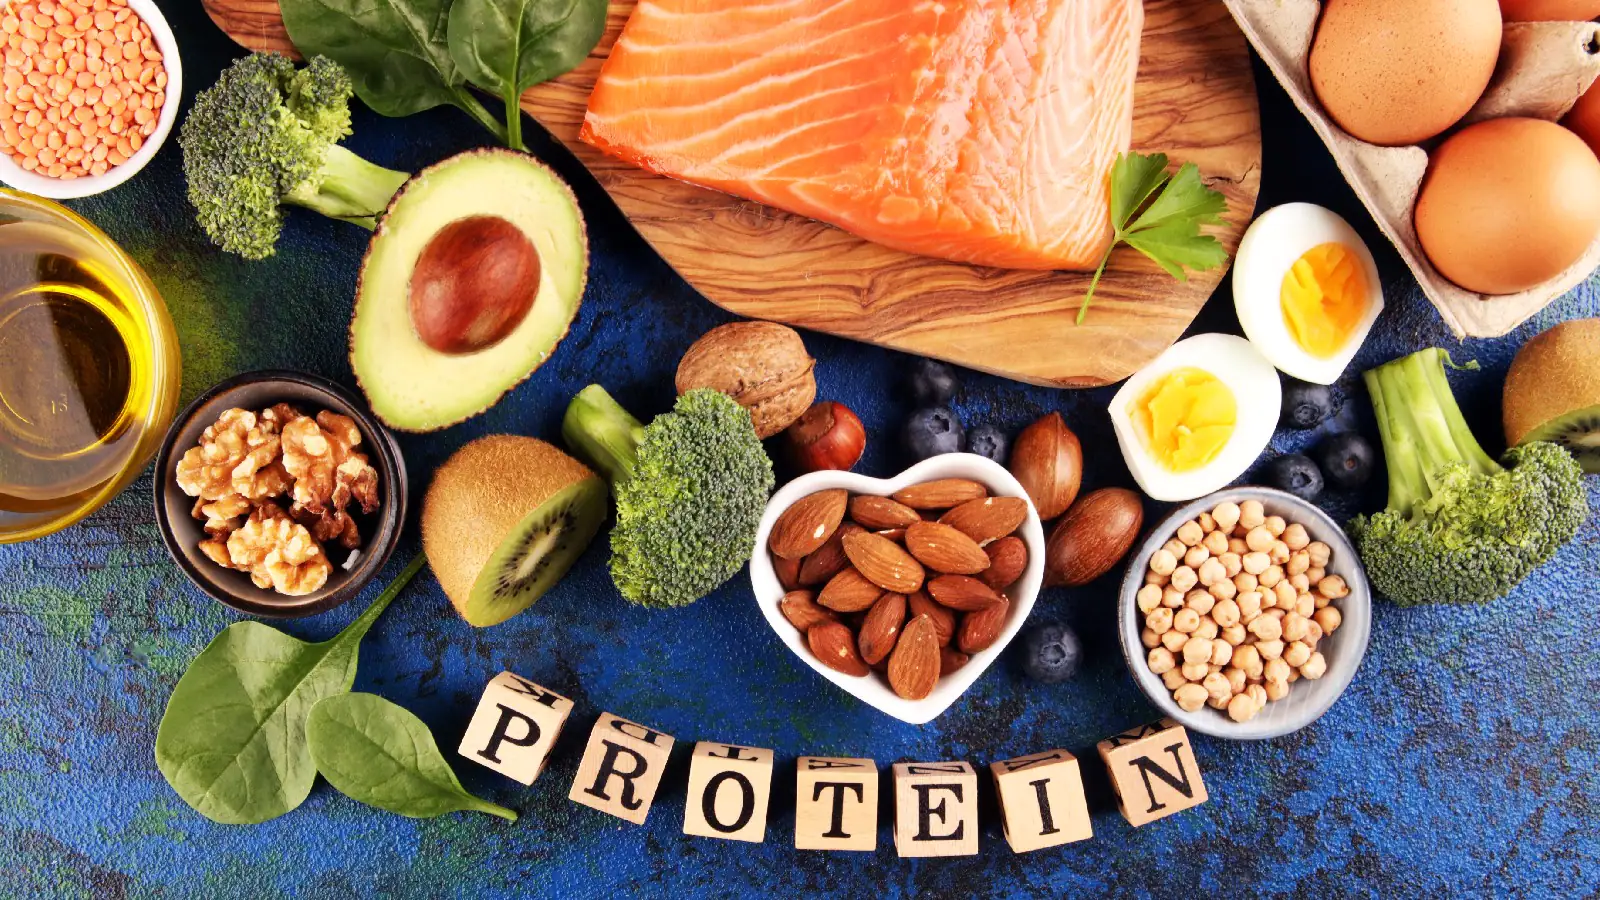 Why Should You Take Protein Rich Food?